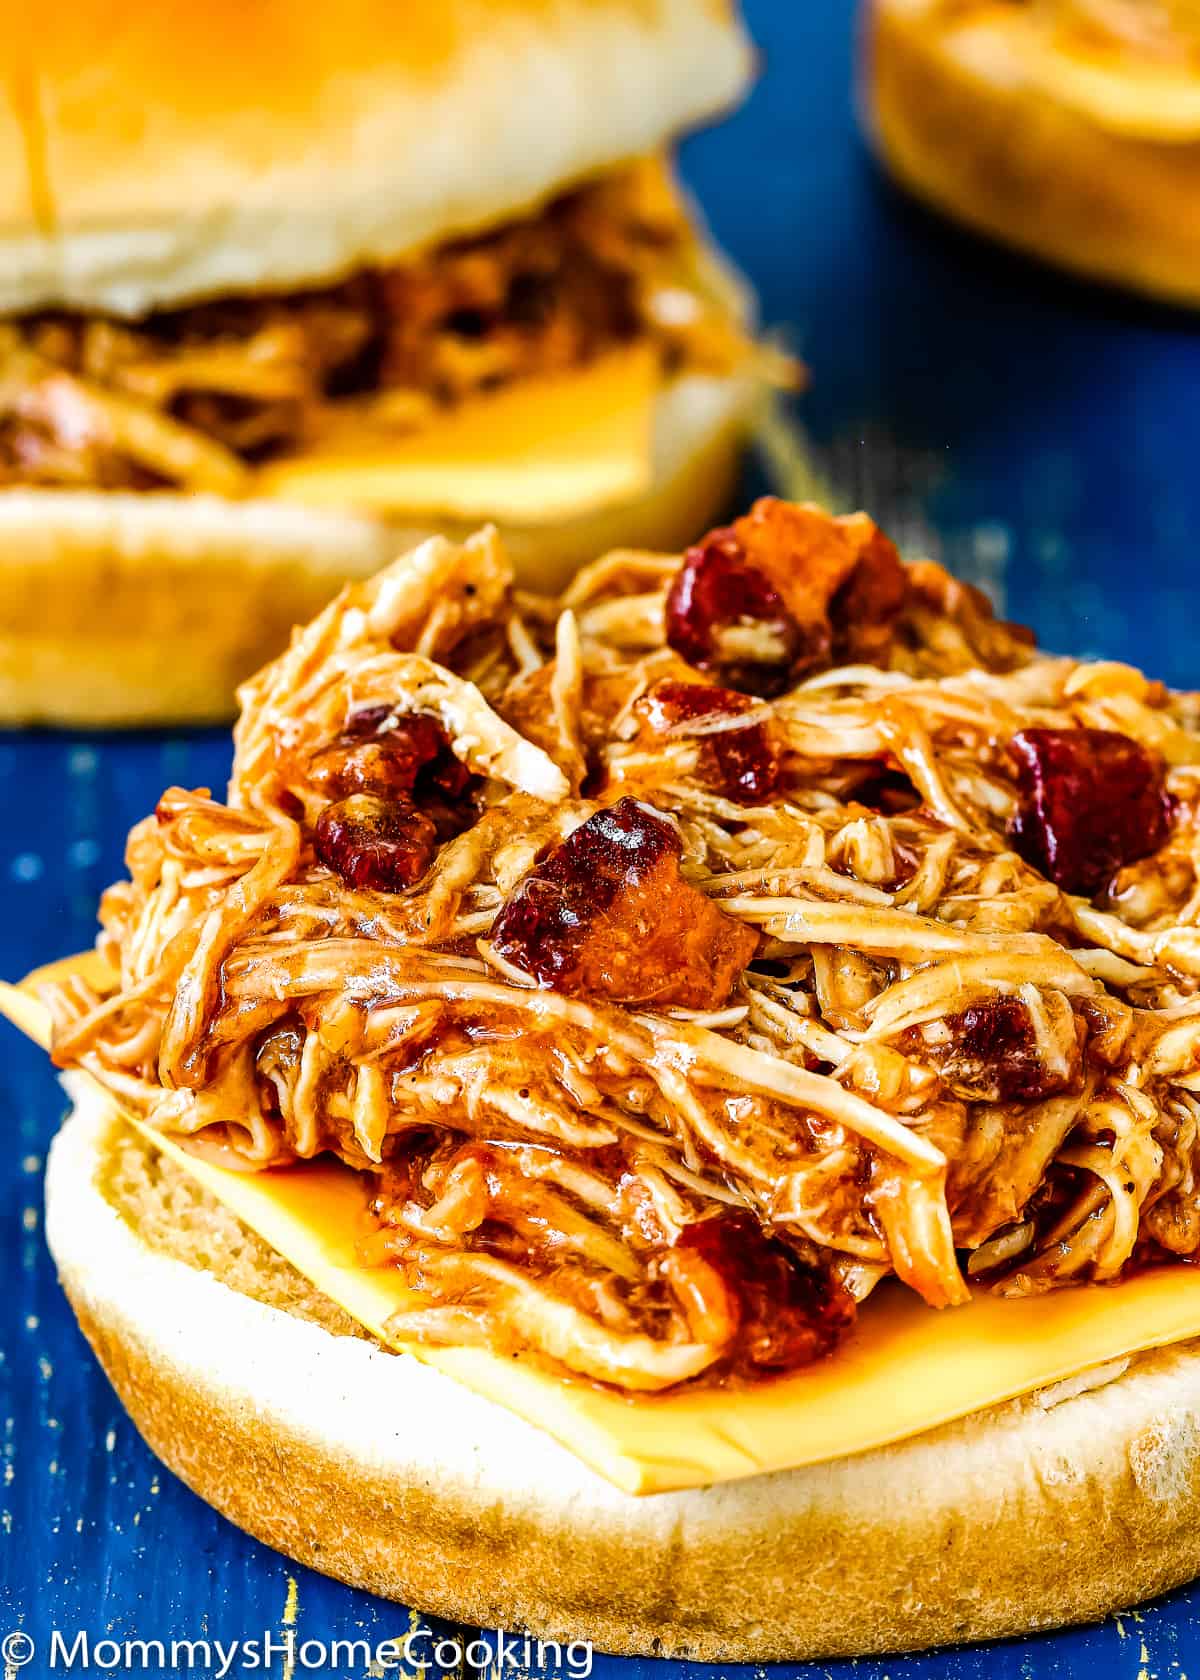 Pineapple Bacon Barbecue Chicken sandwich